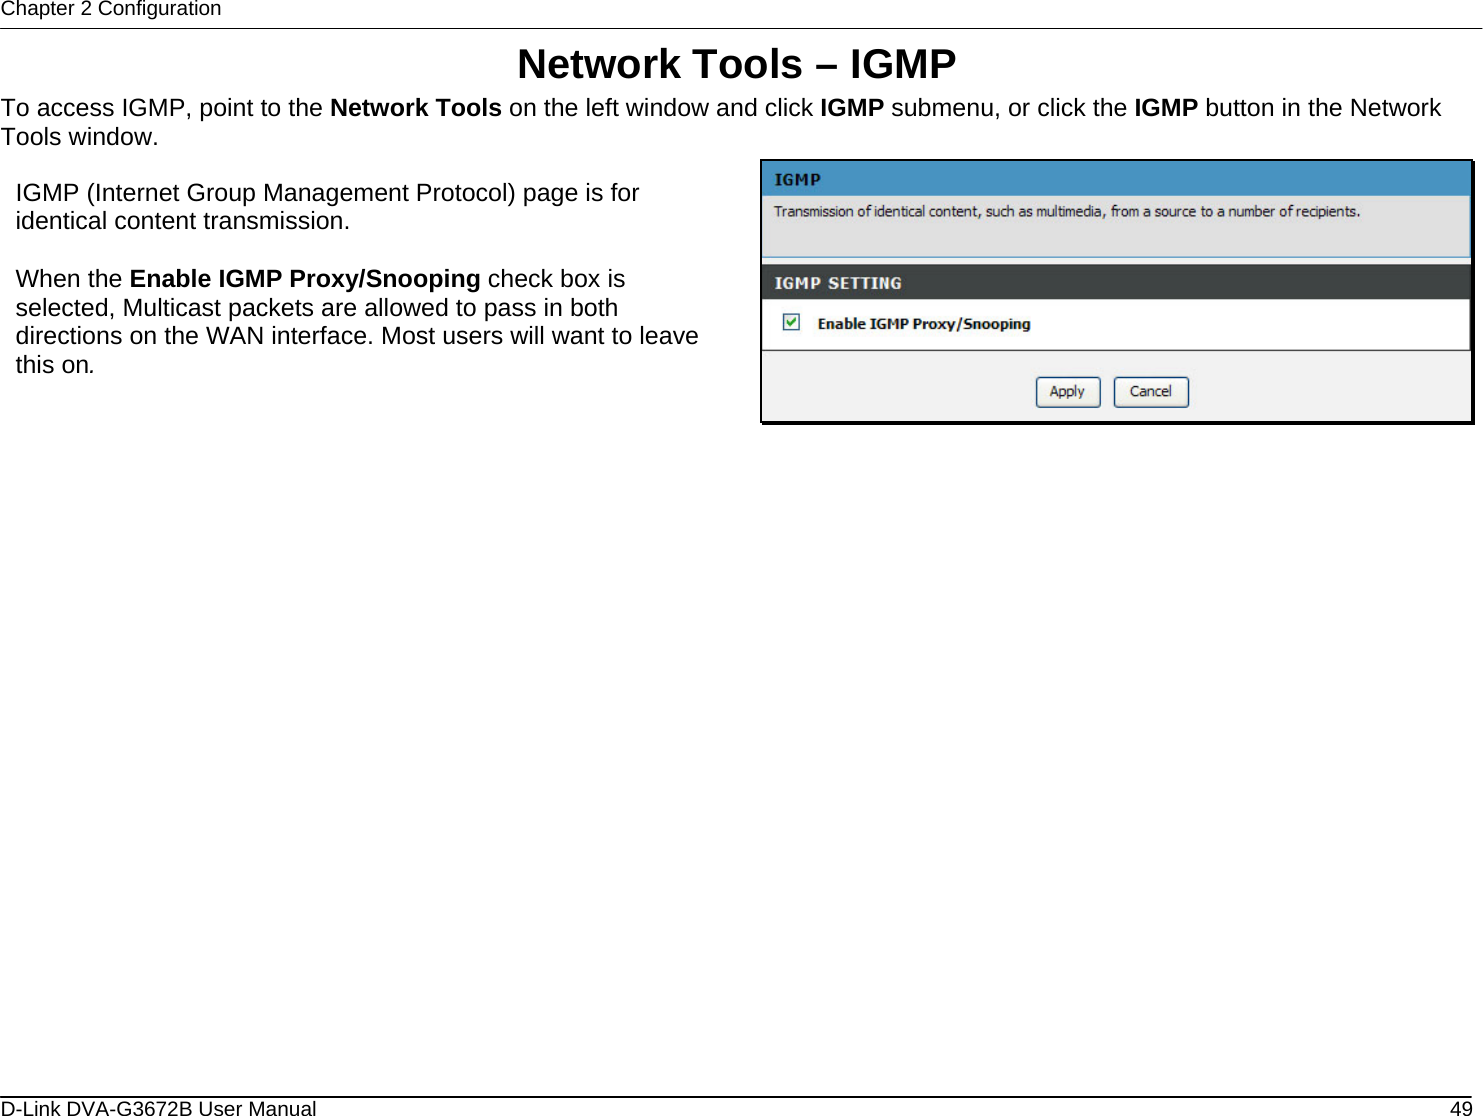 Chapter 2 Configuration Network Tools – IGMP To access IGMP, point to the Network Tools on the left window and click IGMP submenu, or click the IGMP button in the Network Tools window.  IGMP (Internet Group Management Protocol) page is for identical content transmission.  When the Enable IGMP Proxy/Snooping check box is selected, Multicast packets are allowed to pass in both directions on the WAN interface. Most users will want to leave this on.                      D-Link DVA-G3672B User Manual  49